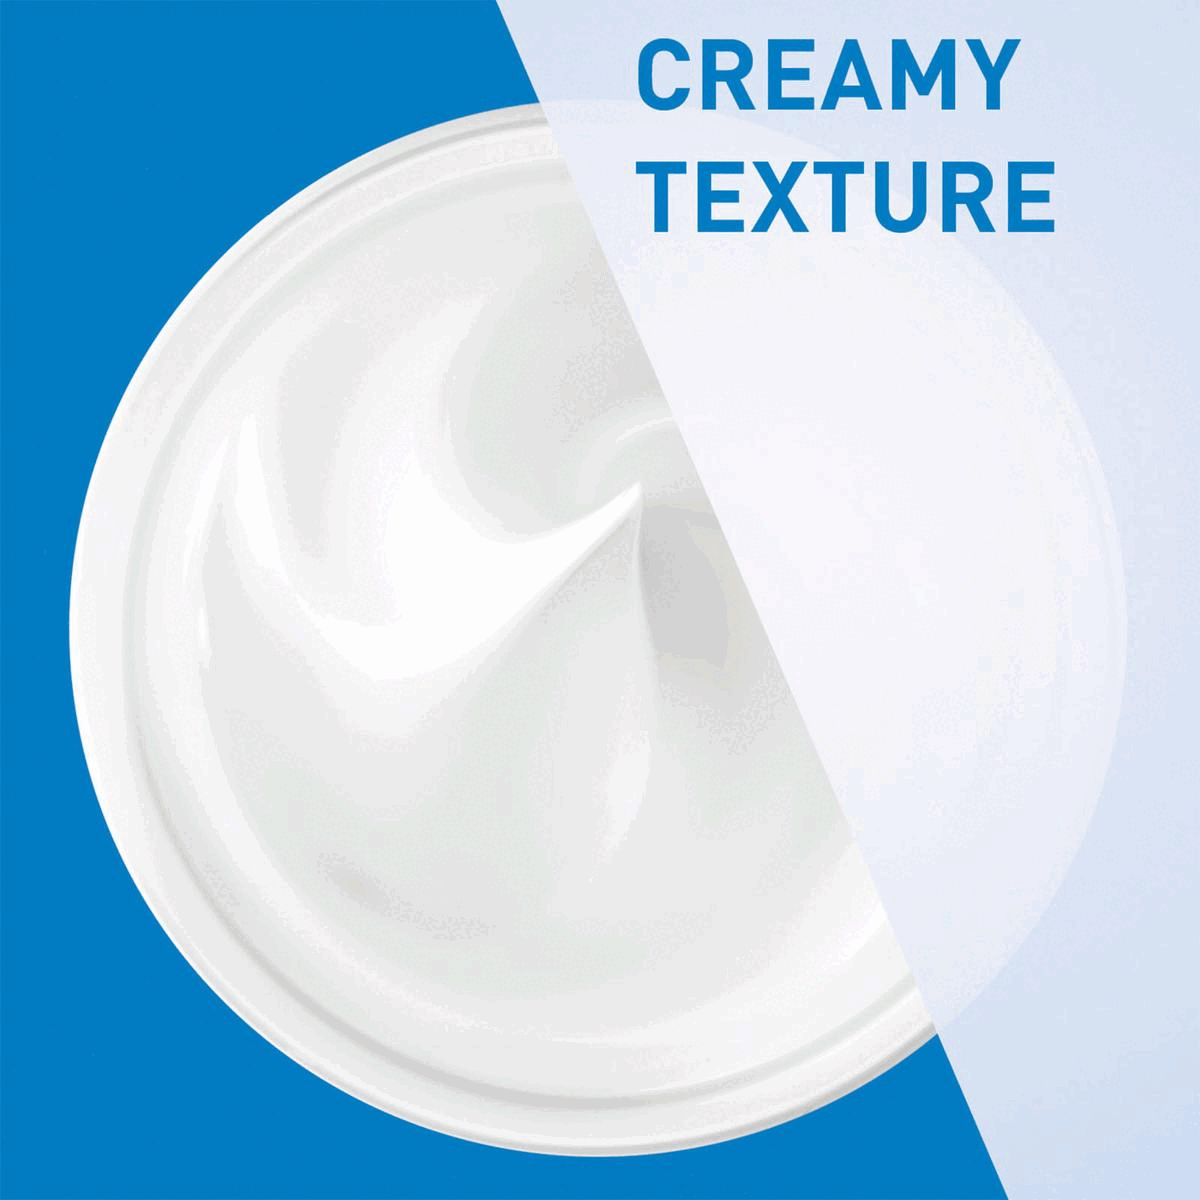 Image 1- creamy texture Image 2- rich, non-greasy feel Image 3- 93% felt instant & long lasting hydration - home tester club survey of 438 people Image 4- ceraVe developed with dermatologists